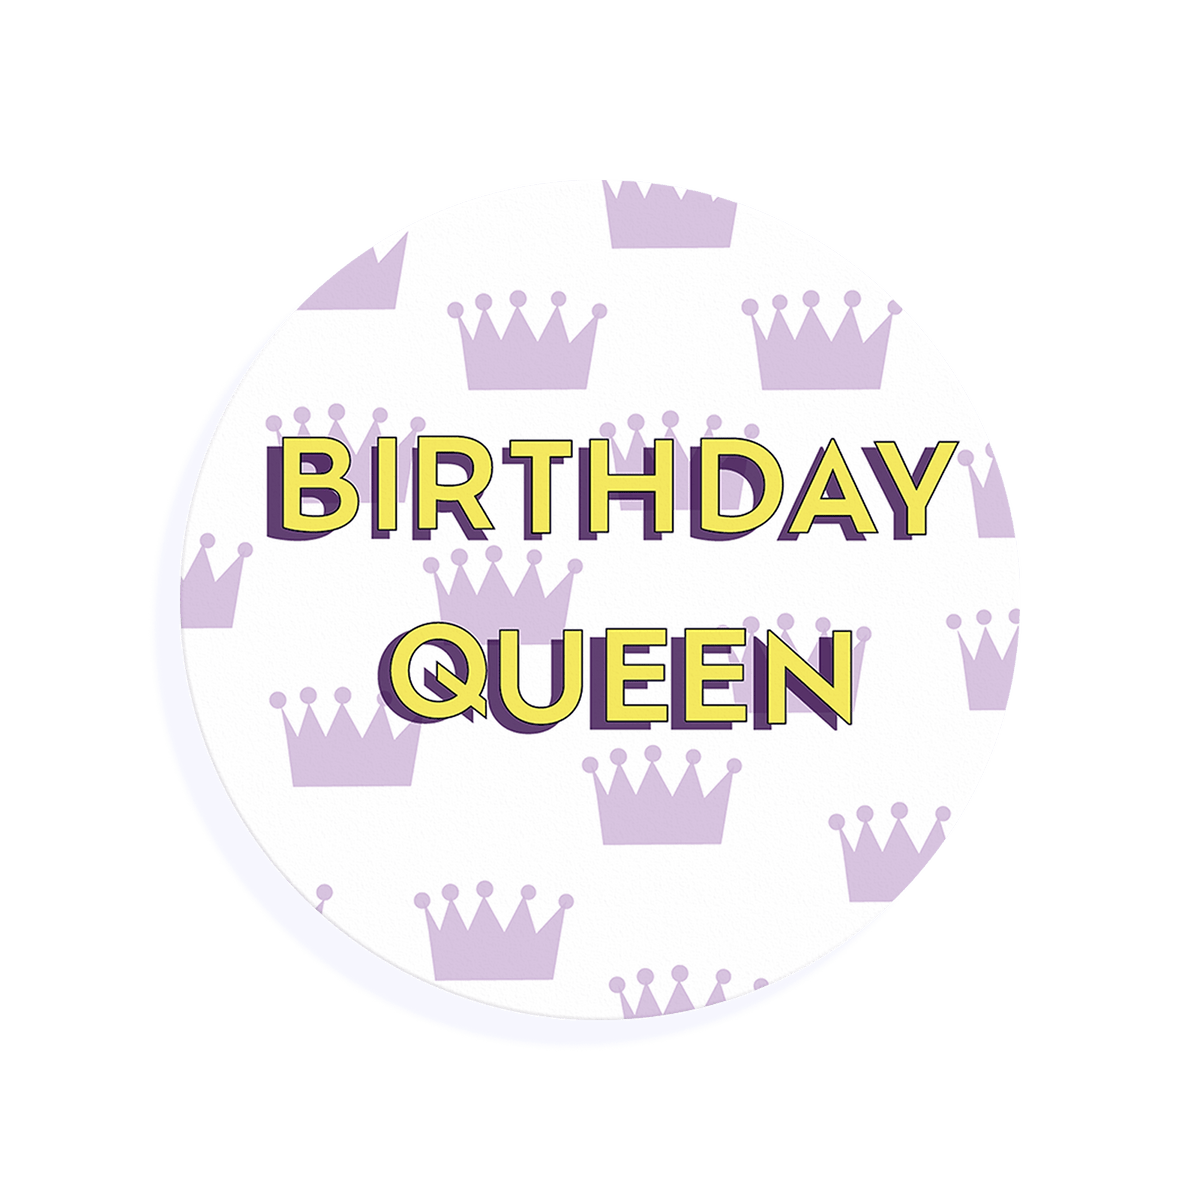 Edible Cocktail Toppers Birthday Birthday Queen Drink Topper